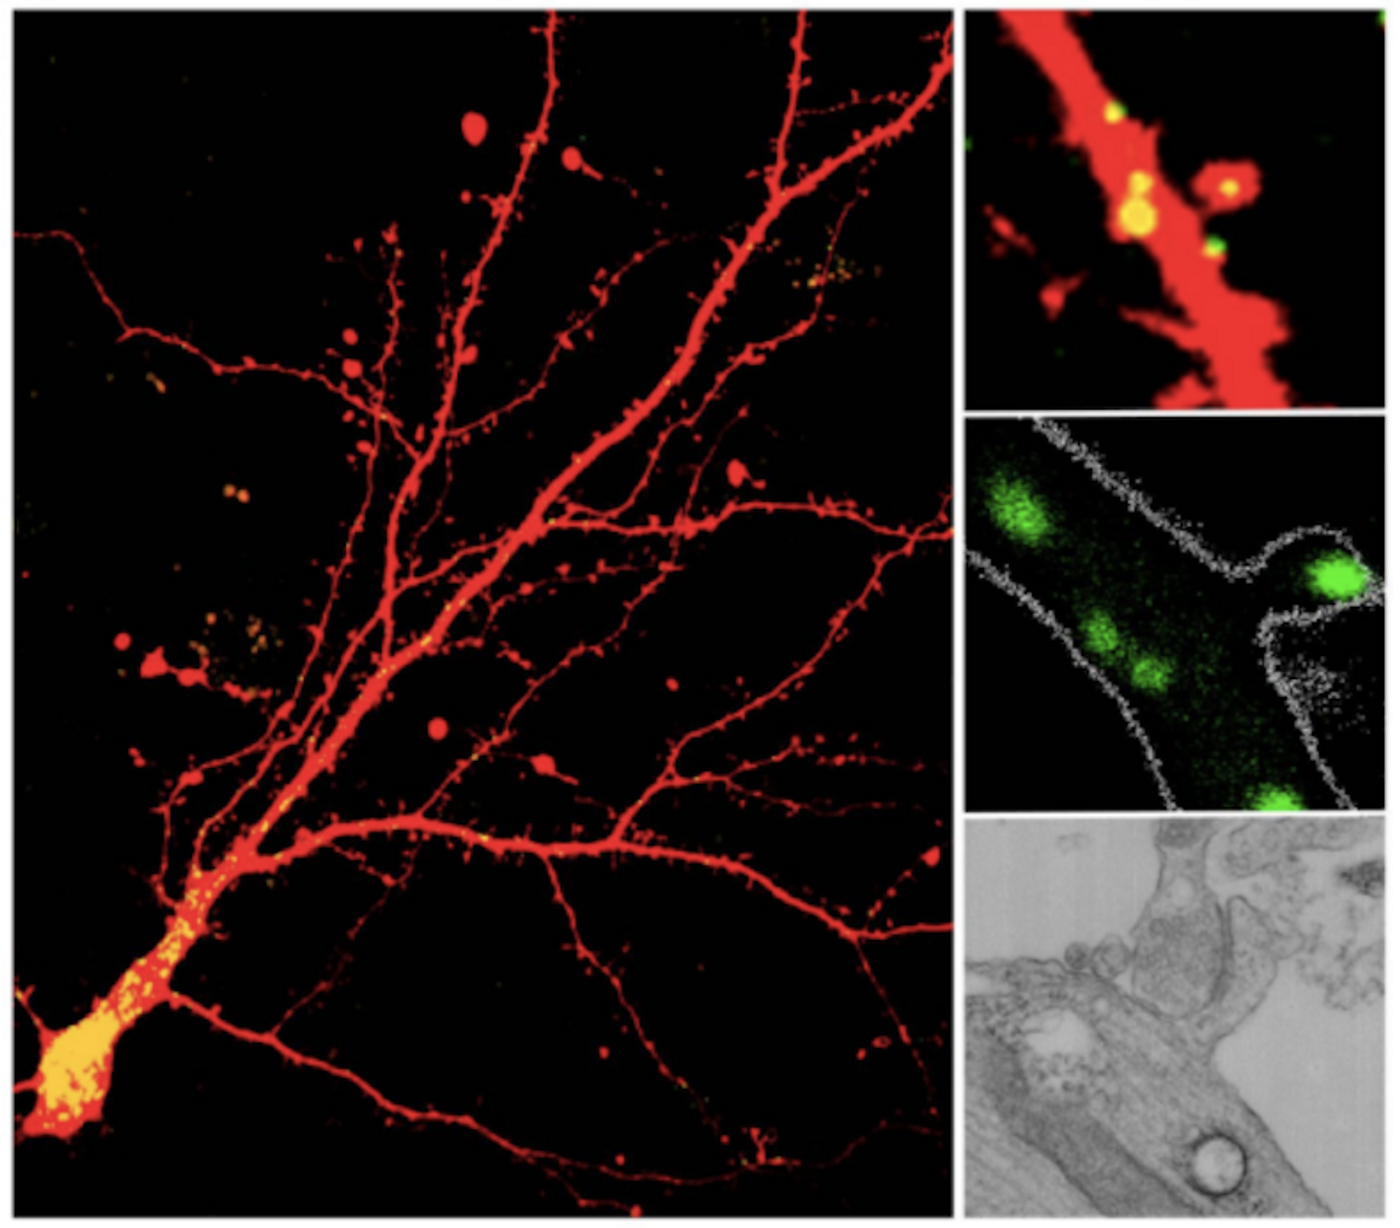 Lysosomes were identified in dendrites and dendritic spines using various techniques. Cultured neurons show lysosomes throughout neurons and in dendritic spines indicated in yellow (left and upper right); brain slices show a lysosome in the head of the spine highlighted in green (middle right); and transmission electron microscopy reveals a lysosome (black circle) near the base of a spine (bottom right). / Credit: Marisa Goo, Gentry Patrick/UCSD/Journal of Cell Biology